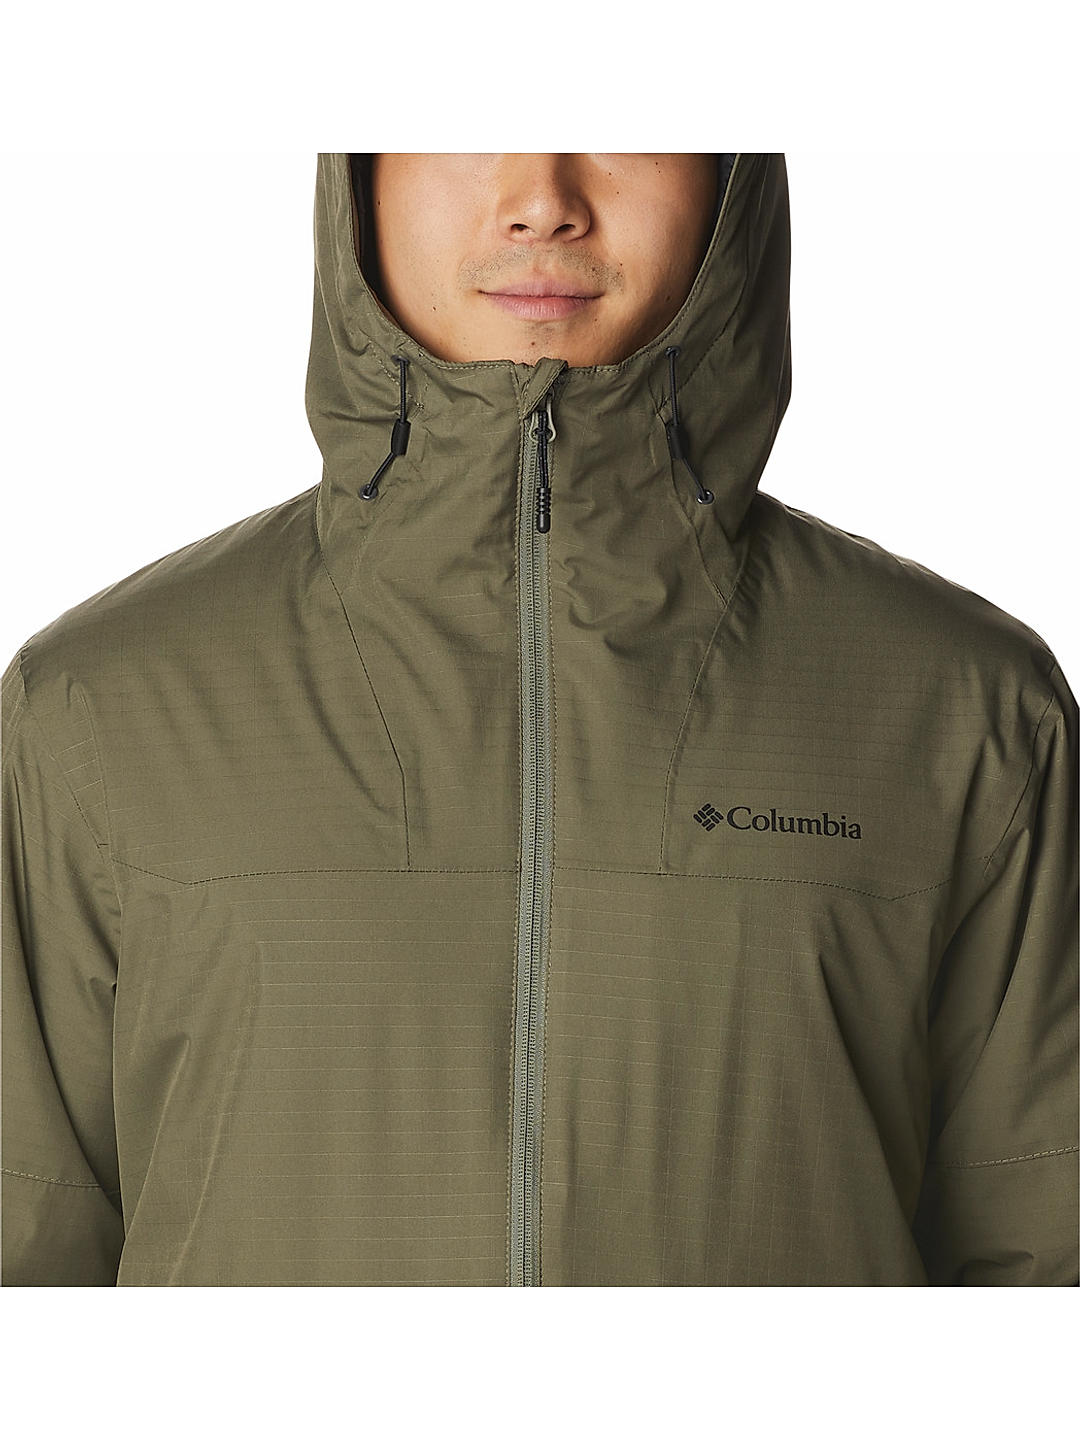 Buy Green Point Park Insulated Jacket for Men Online at Columbia ...